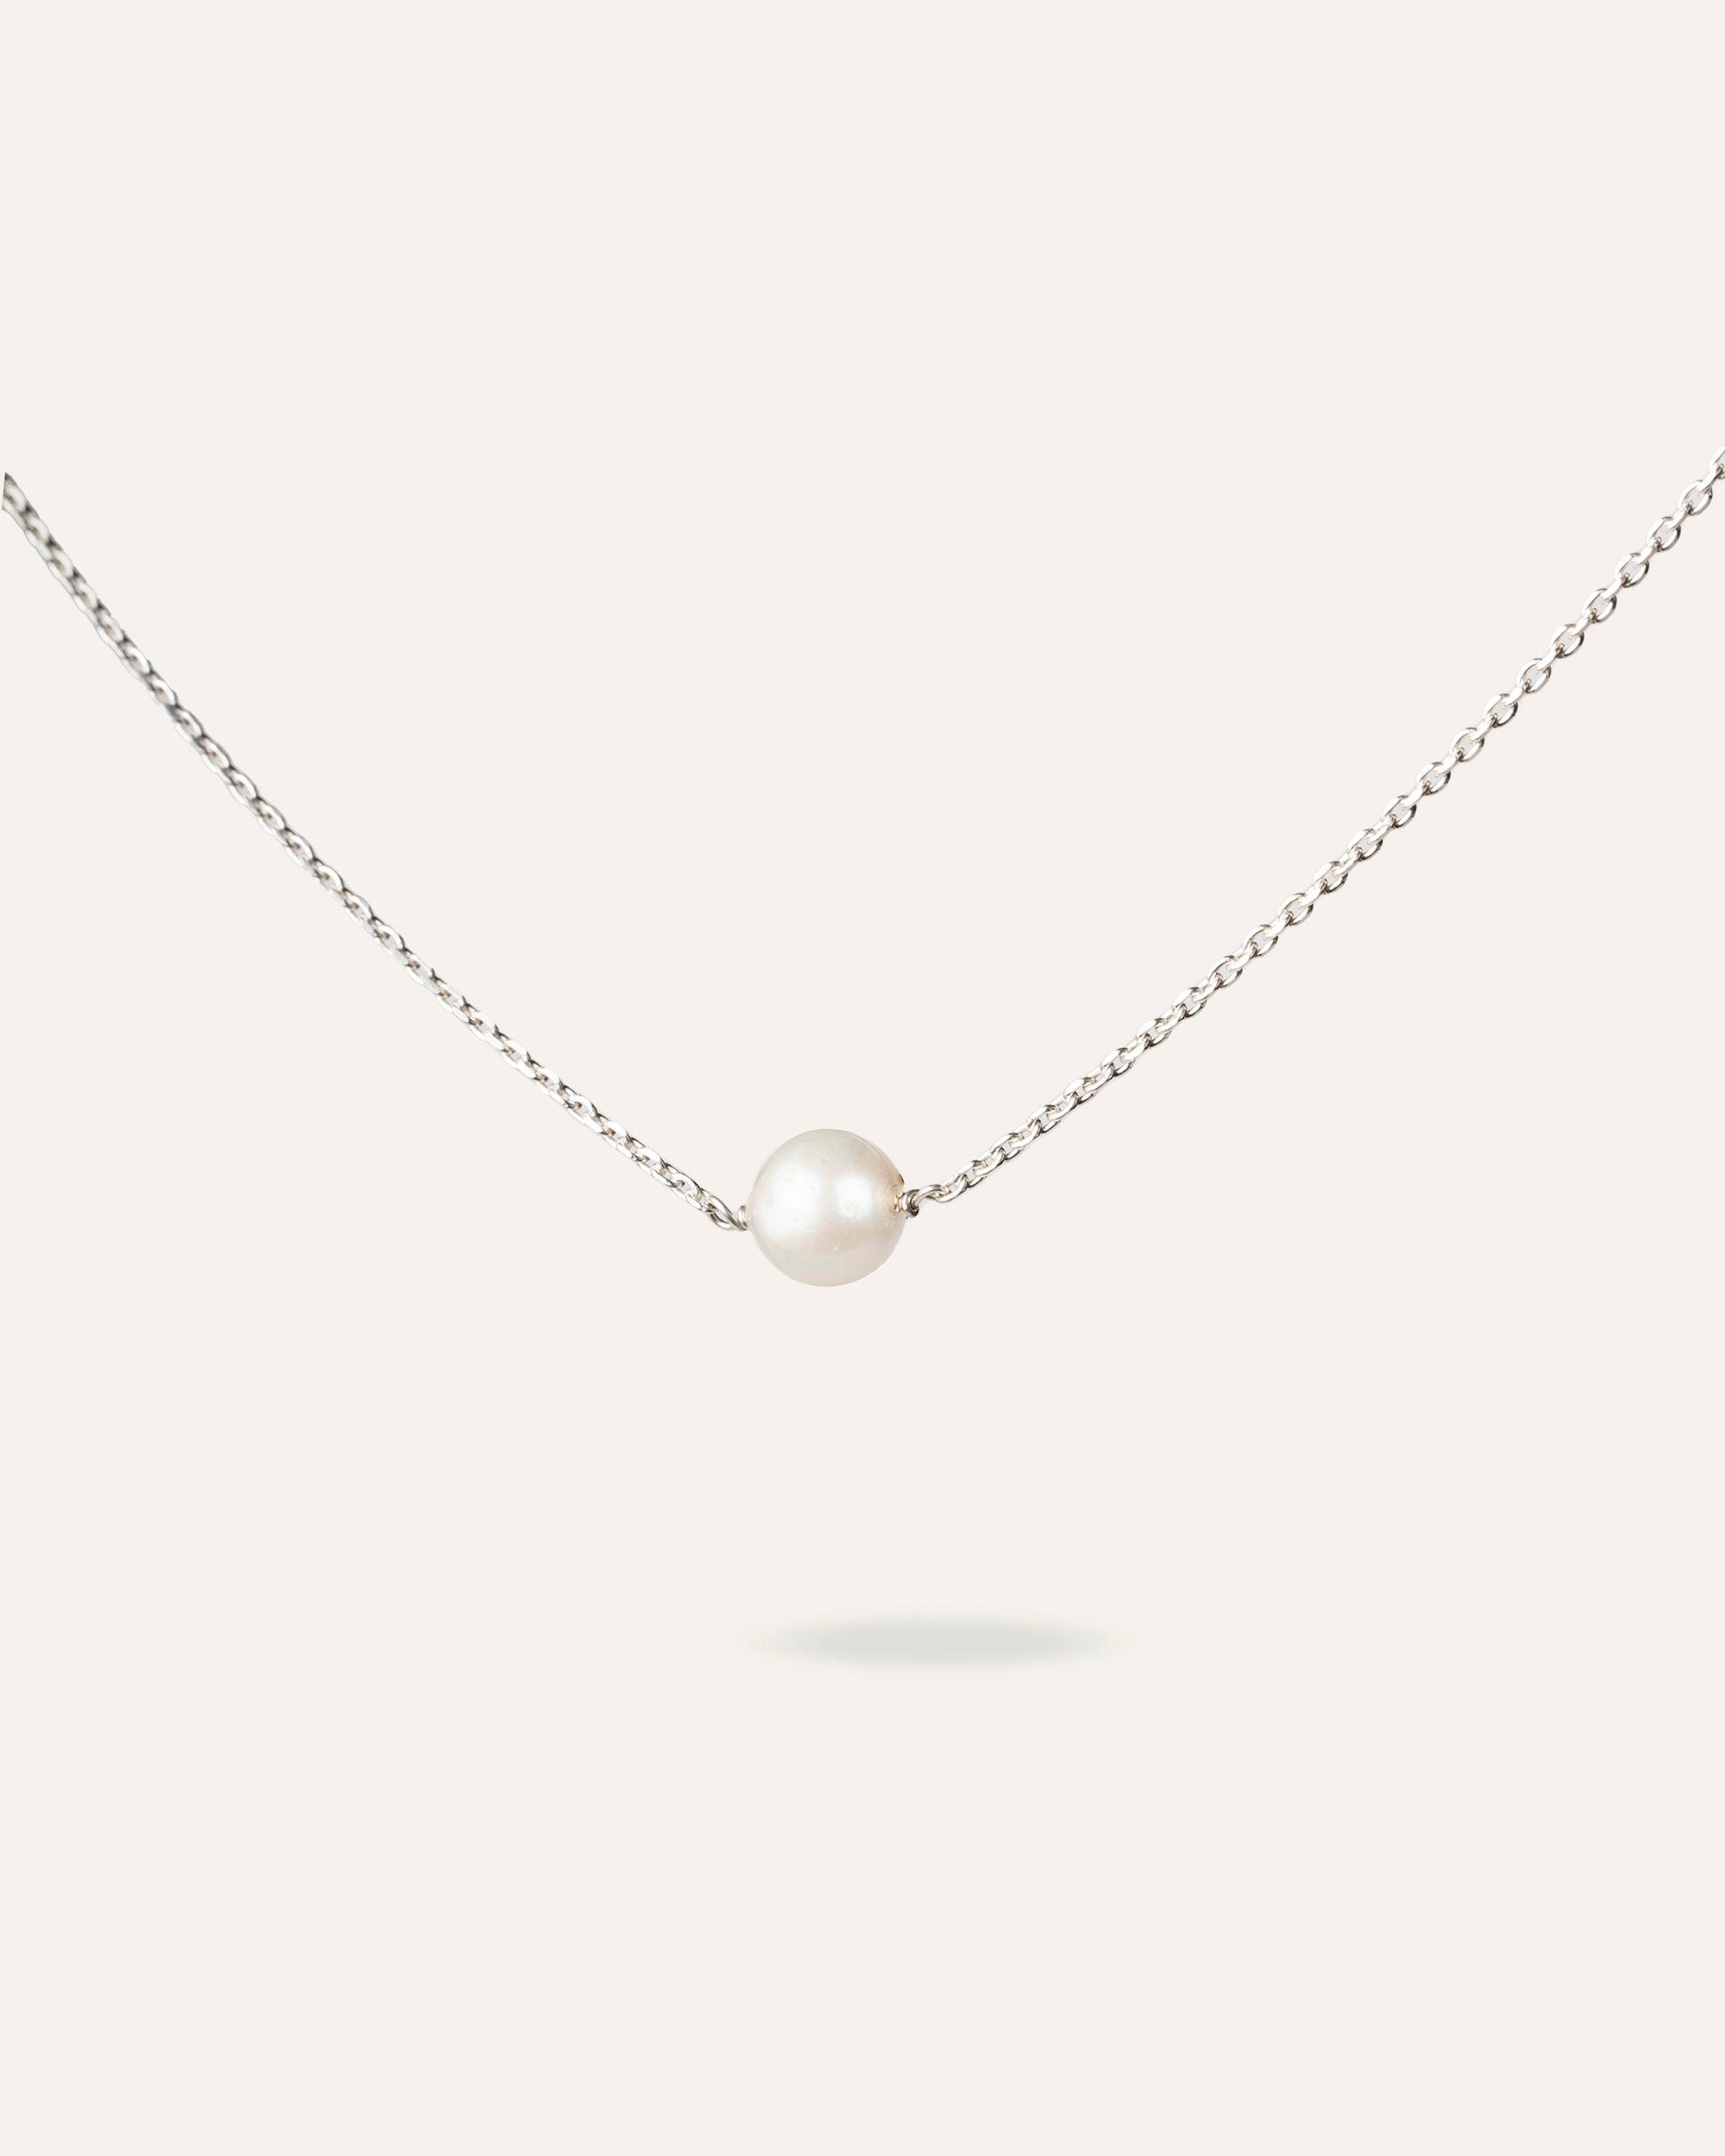 Elegance silver and pearl necklace